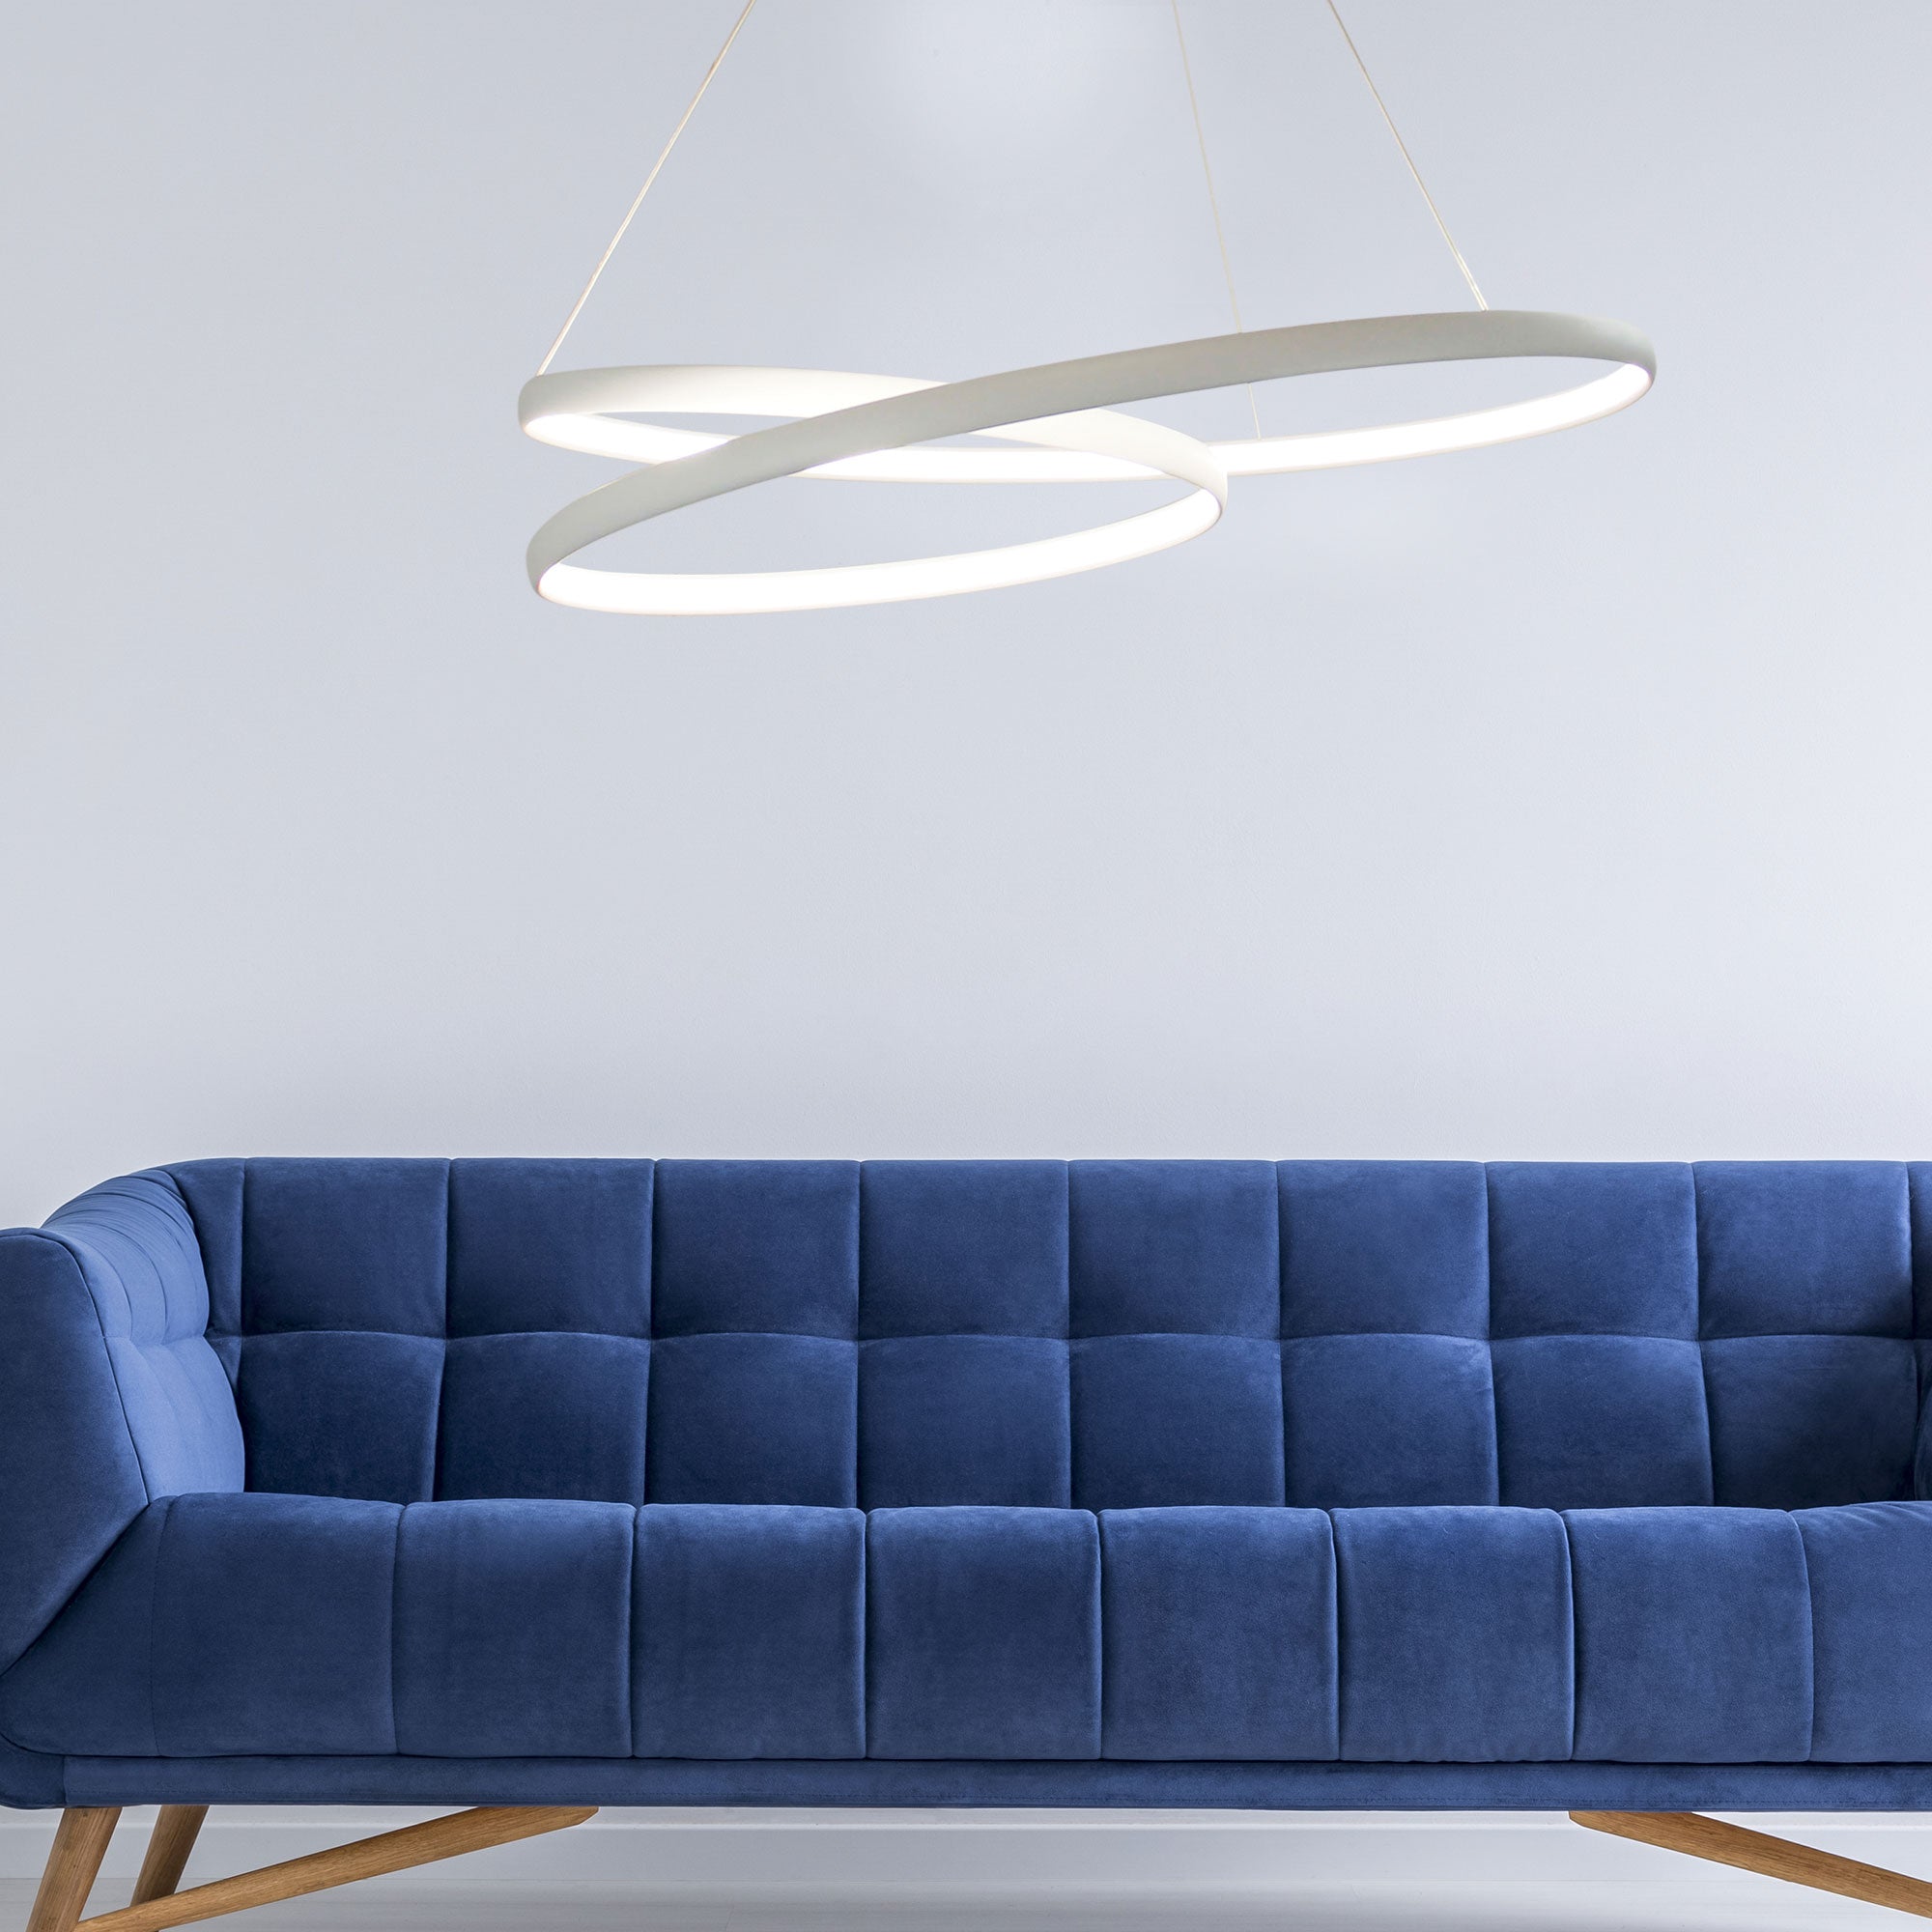 endless modern circular pendant in white over a blue sofa suspended loop lighting 2020 latest trends